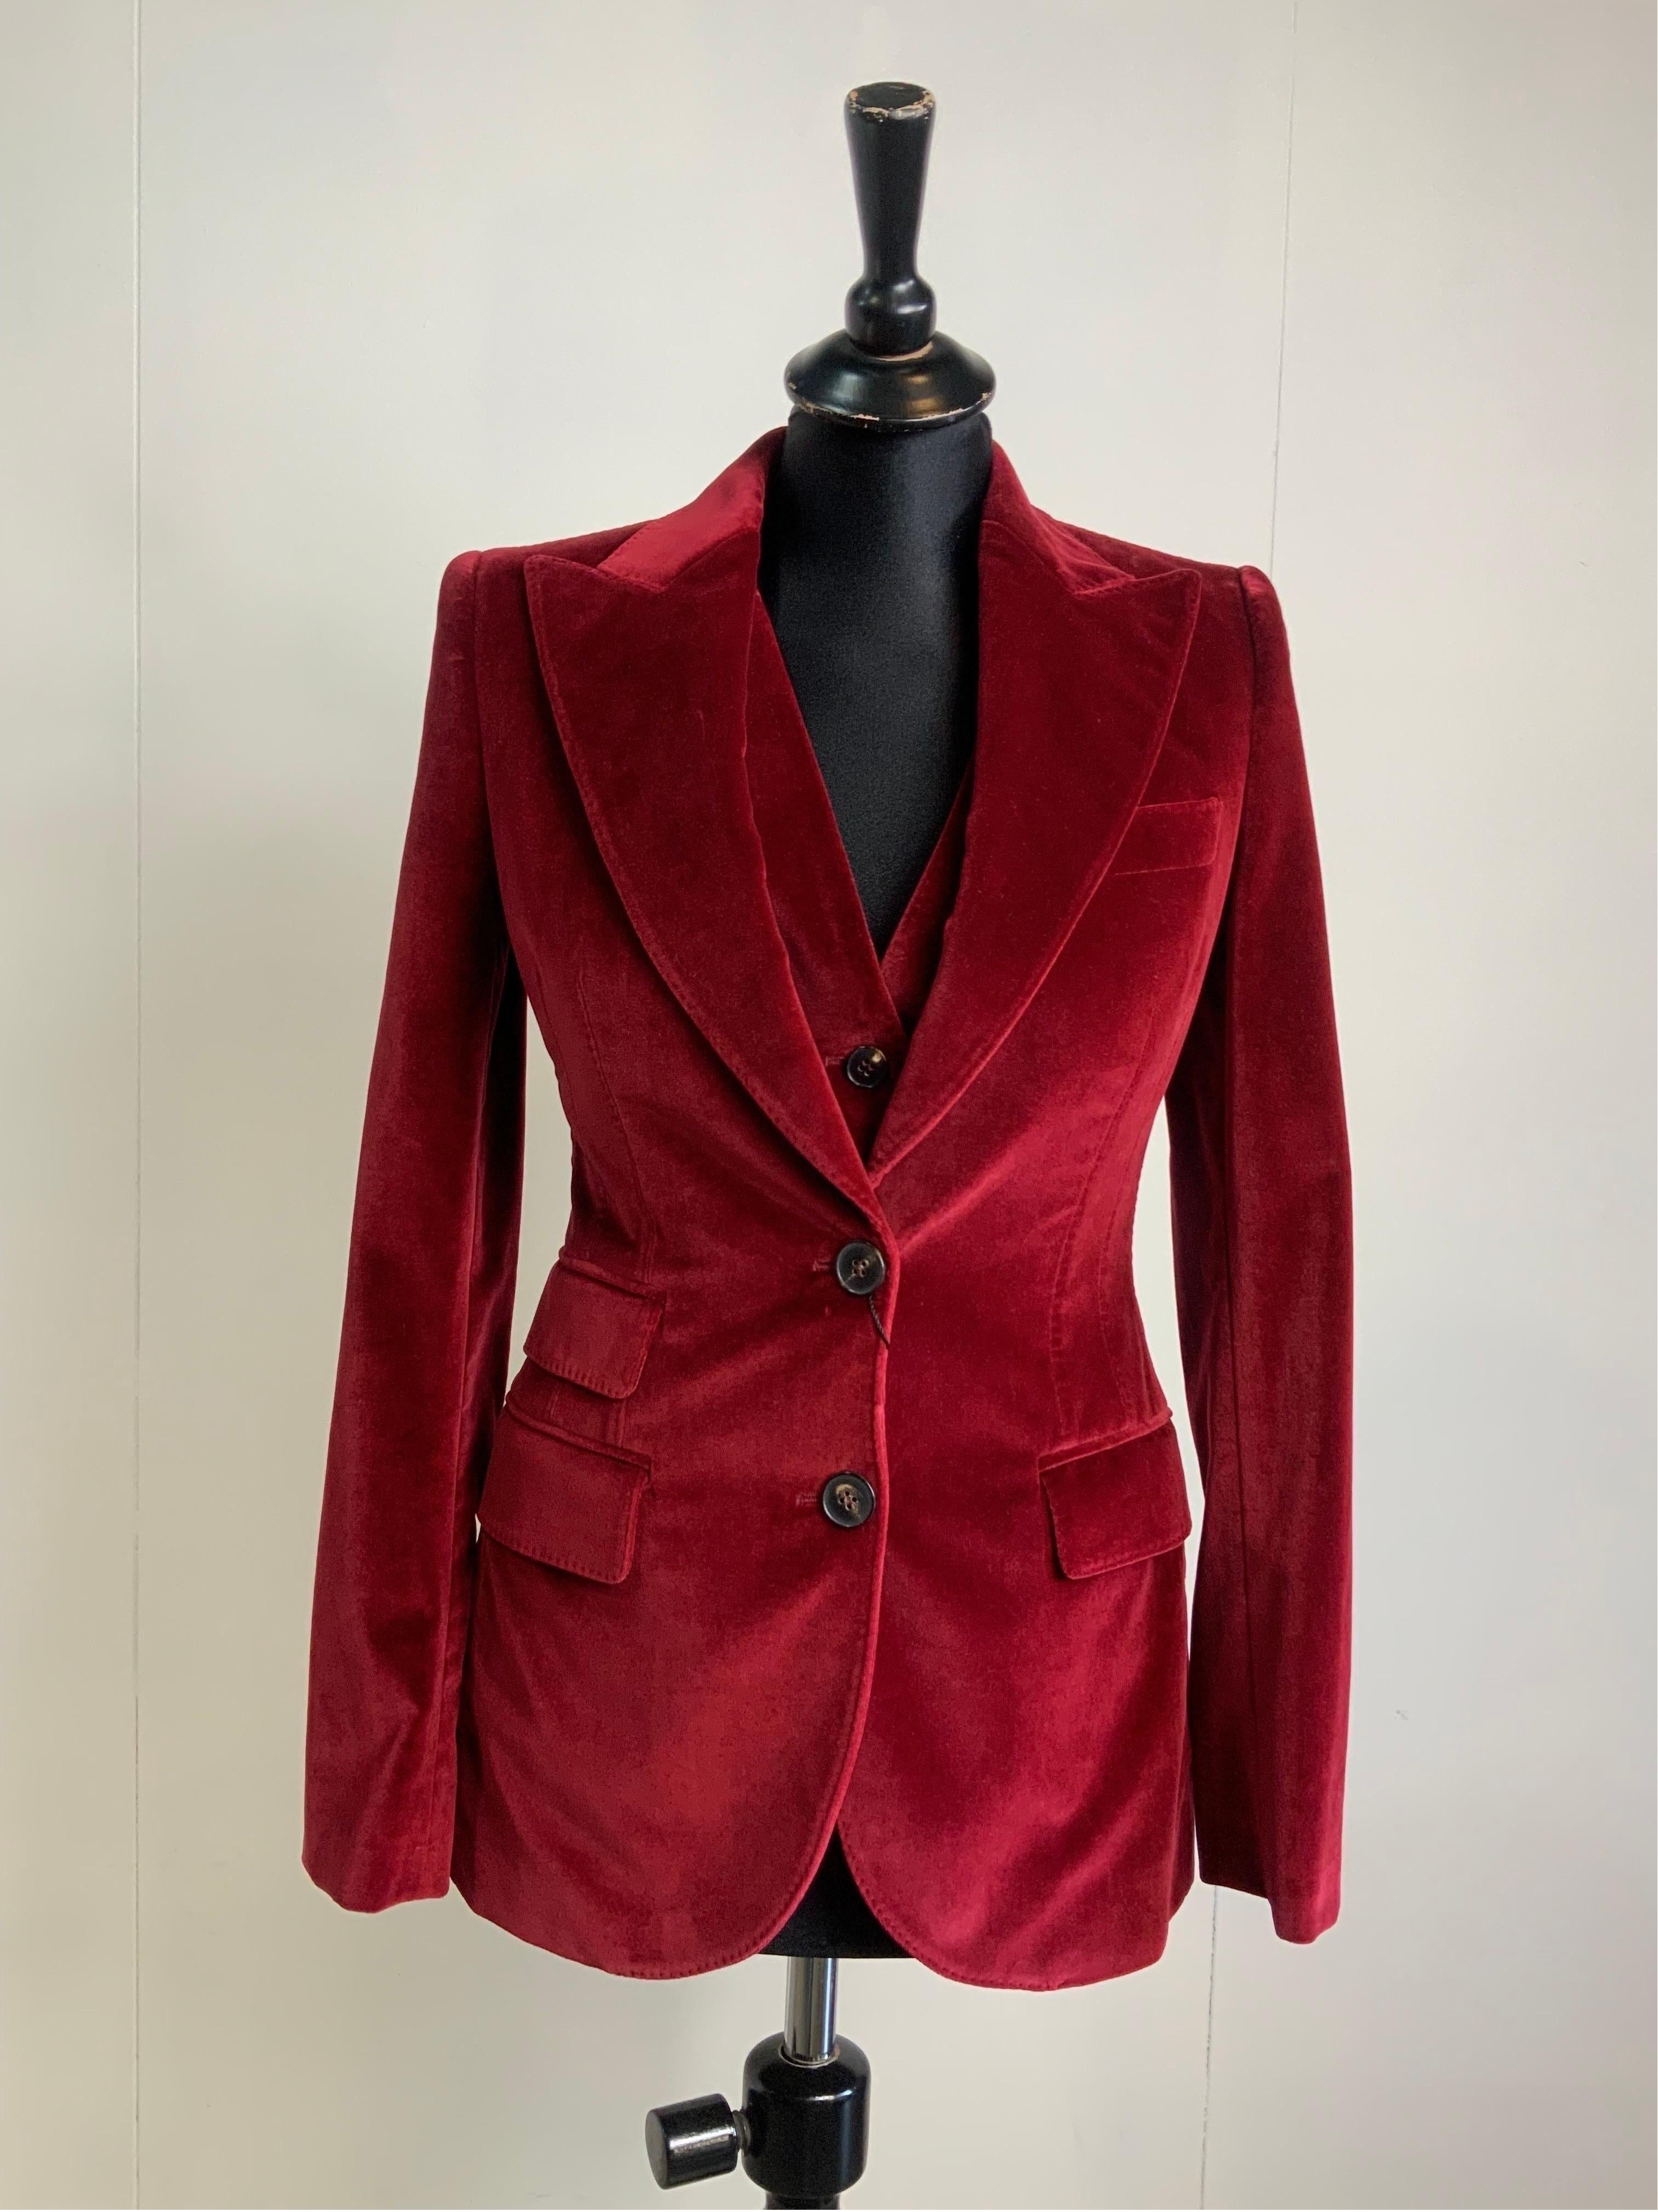 Dolce & Gabbana Jacket + Vest.
Made of cotton and elastane. Feels like velvet.
Lined in burgundy silk.
The jacket is an Italian 36.
Shoulders 38 cm
Bust 38 cm
Length 73 cm
Sleeve 60 cm
The vest is an Italian 40.
Bust 40 cm
Length 56 cm
New, with